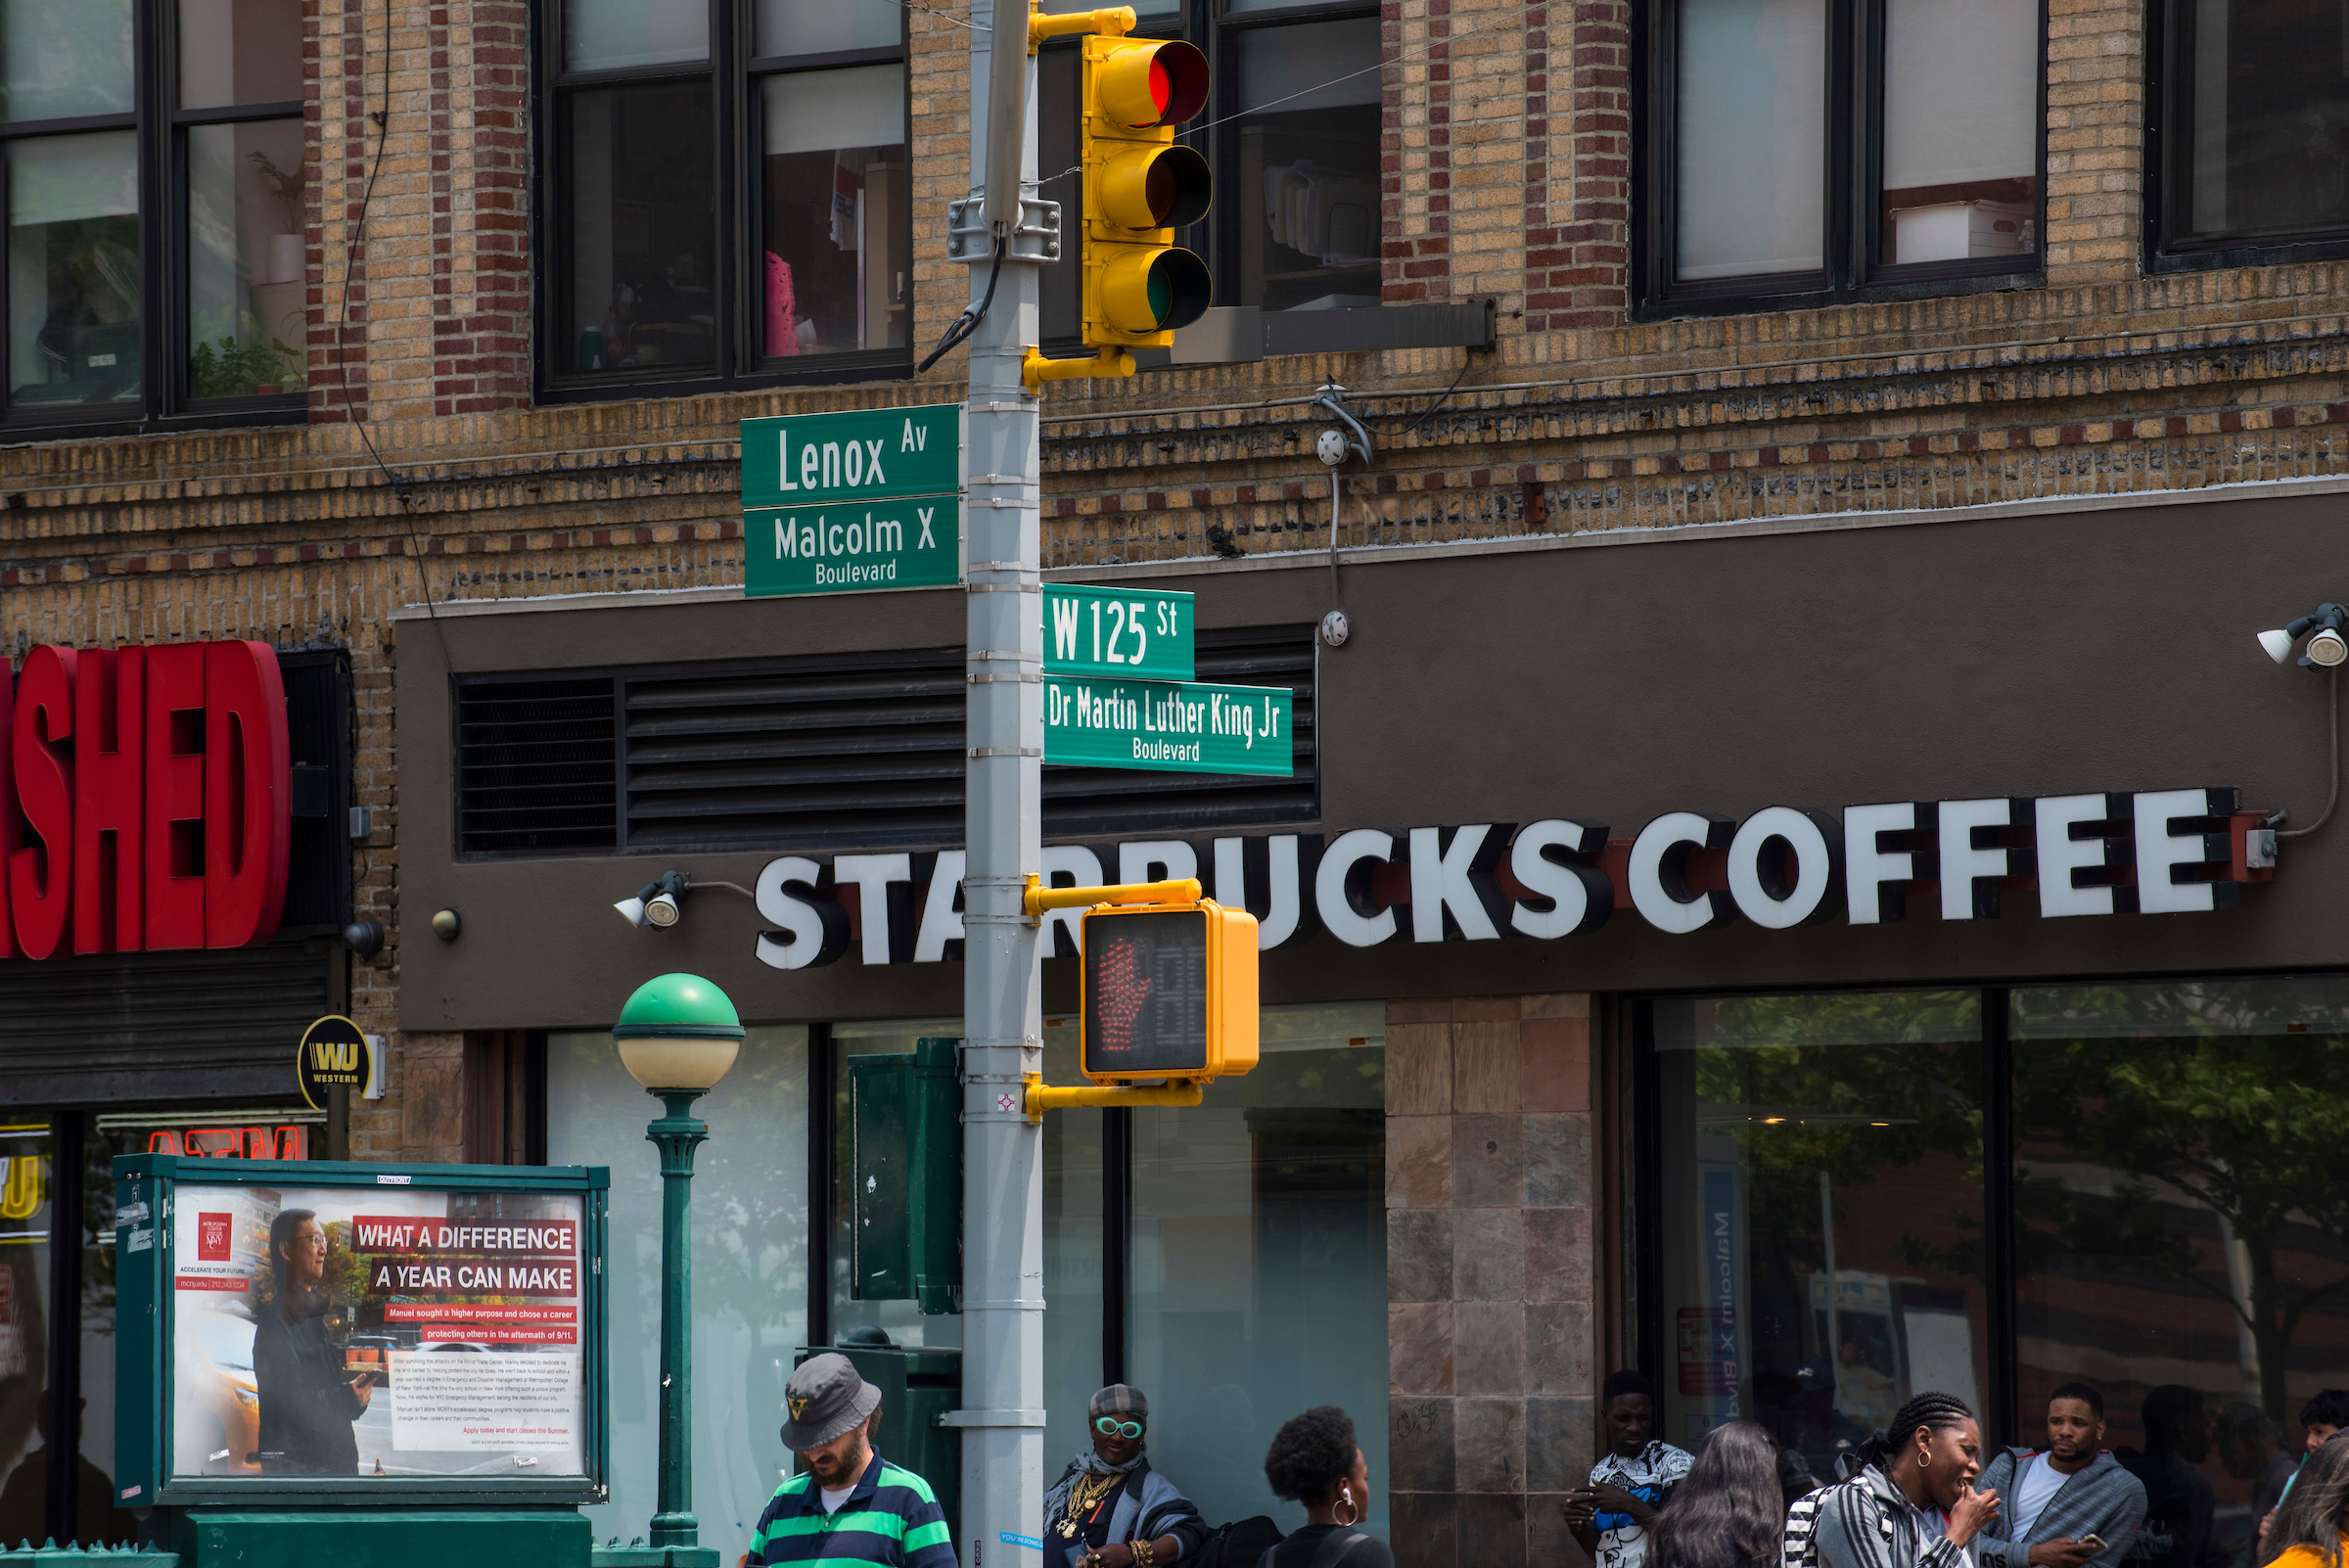 125th st and lenox street signs with starbucks sign in background